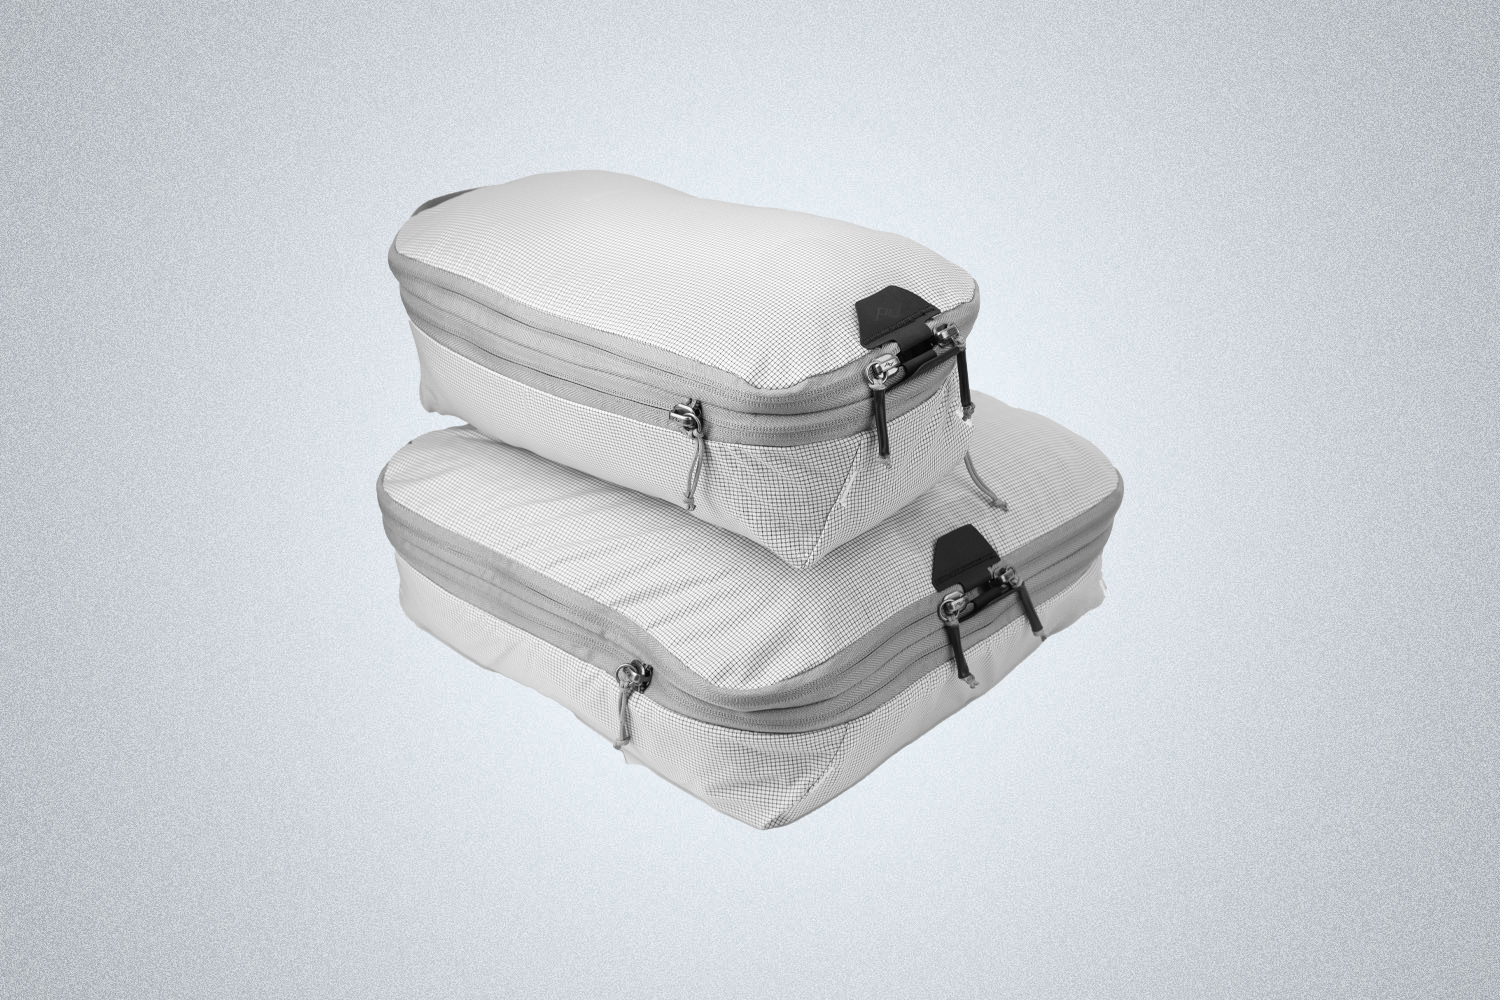 Peak Design Packing Cubes in black and white